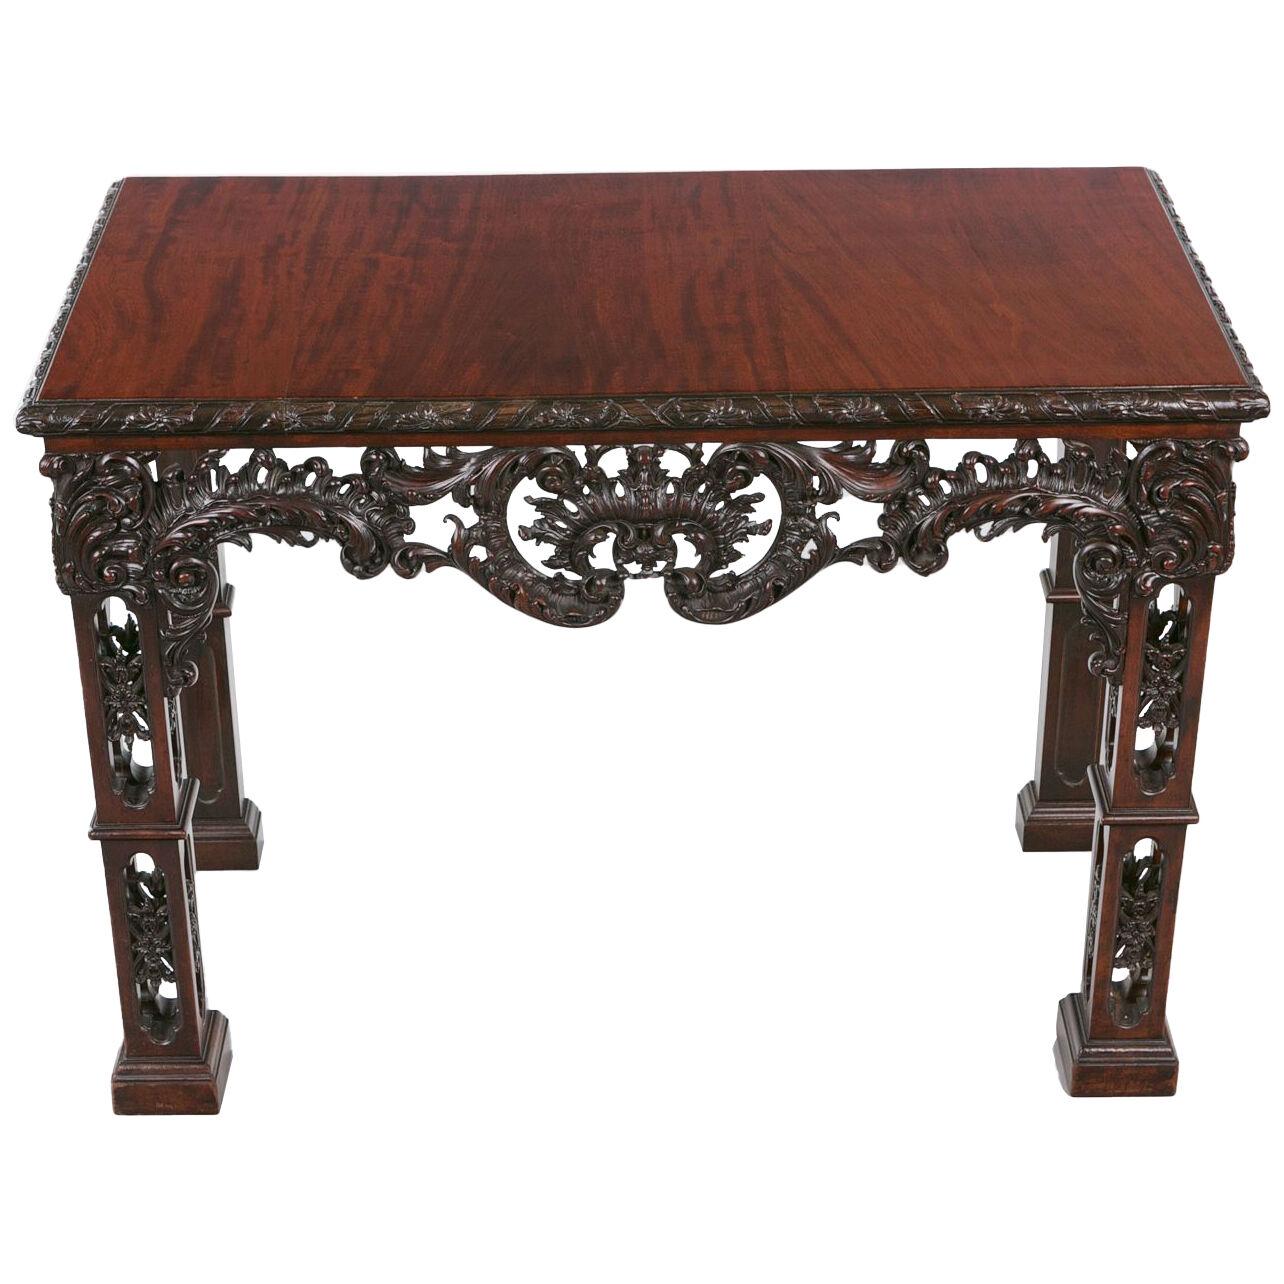 18th Century Irish Side Table after Thomas Chippendale